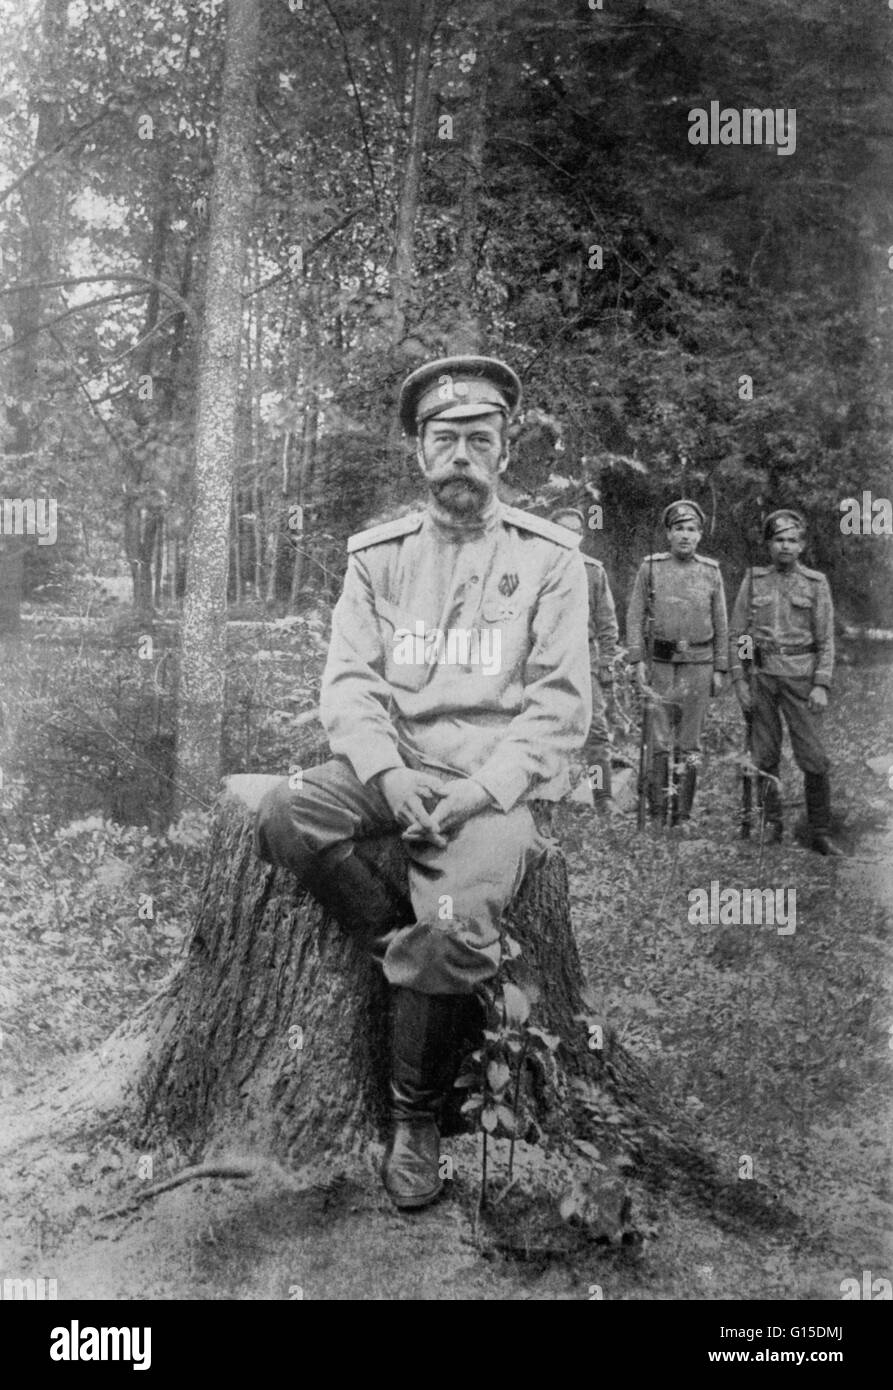 Undated photograph of Nicholas Romanov in military dress. Nicholas II (May 18, 1868 - July 17, 1918) was the last Emperor of Russia, Grand Duke of Finland, and titular King of Poland. His official short title was Nicholas II, Emperor and Autocrat of All t Stock Photo